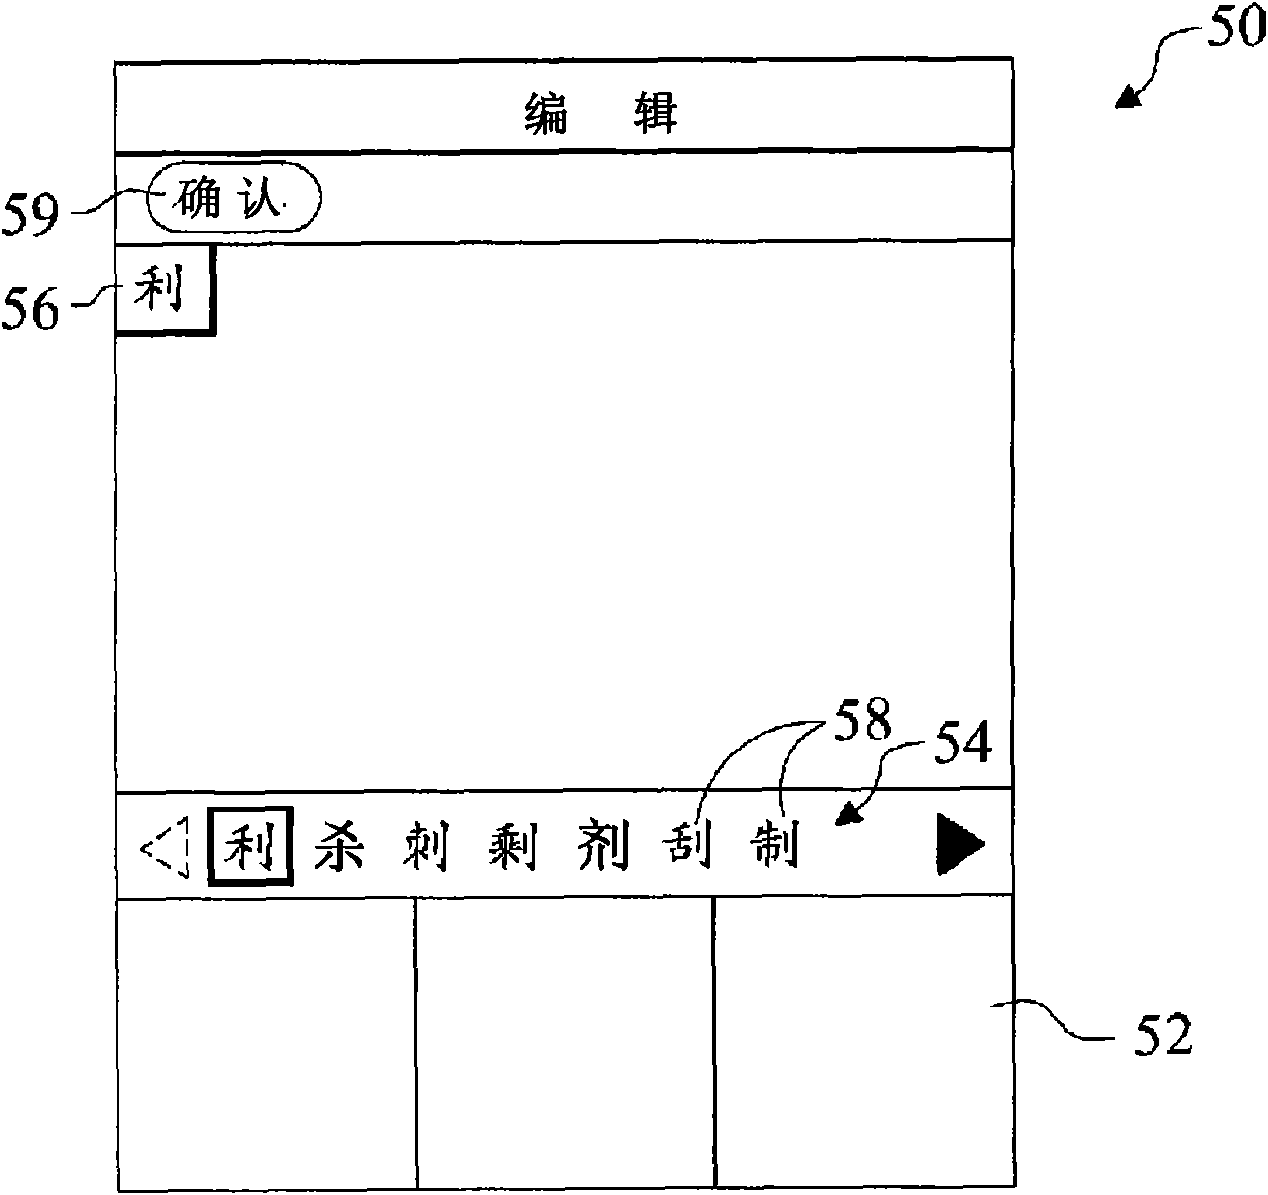 Man-machine input system and input method for text editing